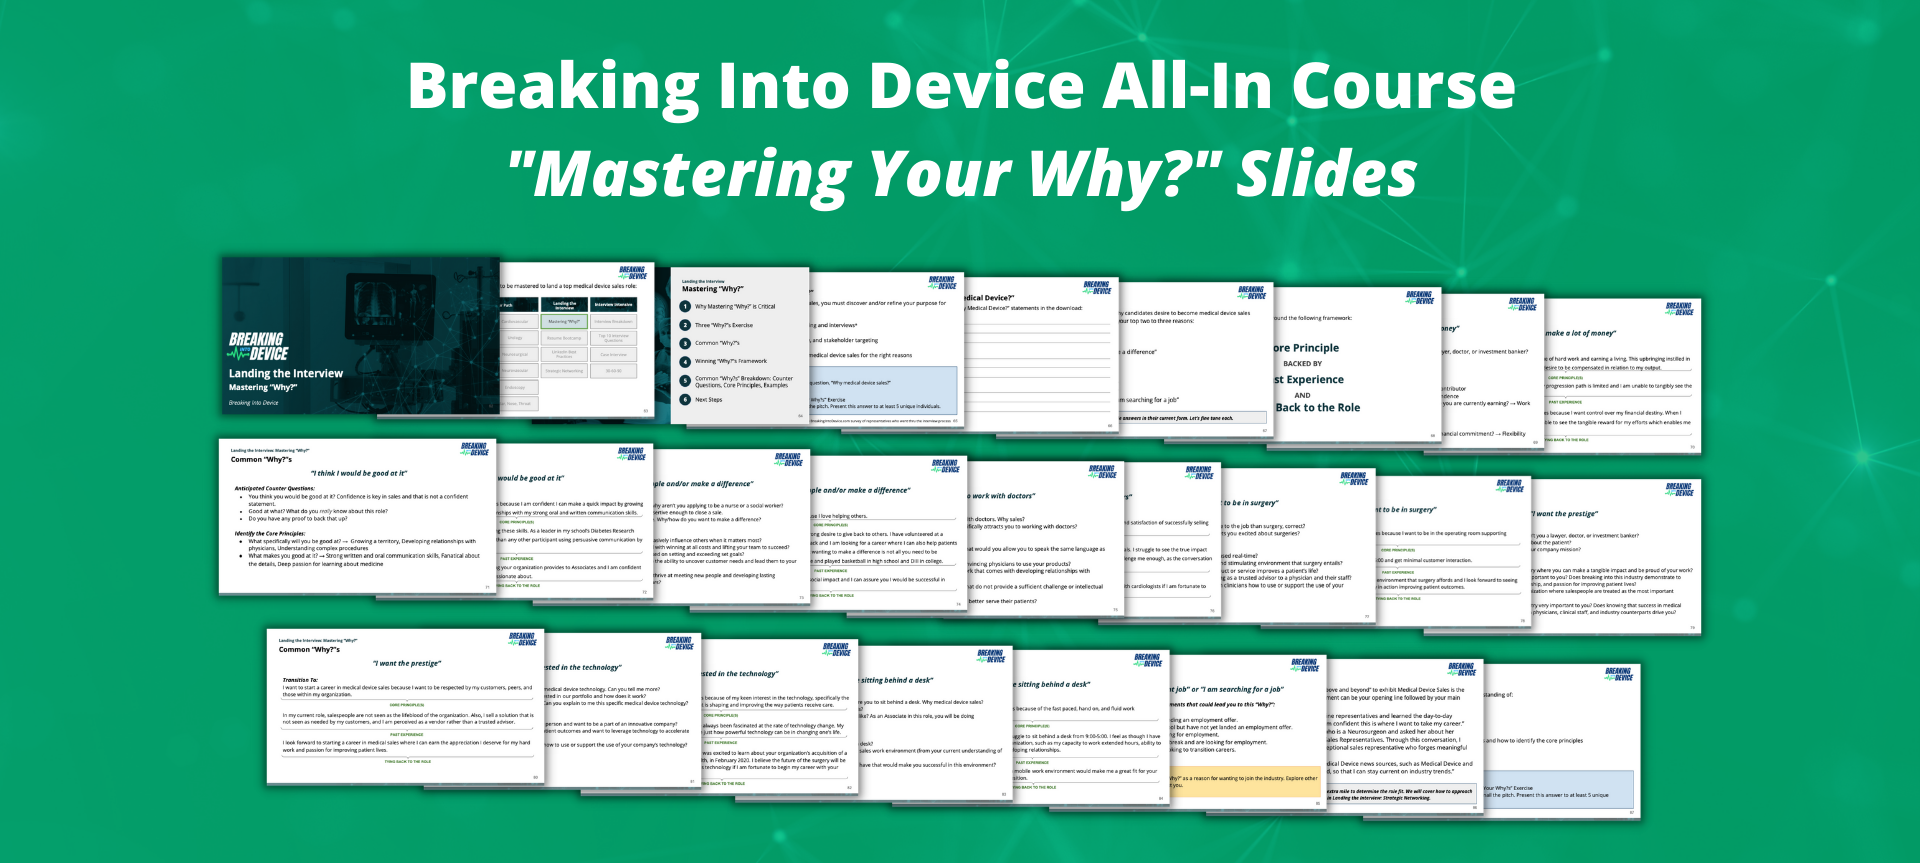 Mastering Your Why Medical Device Slides